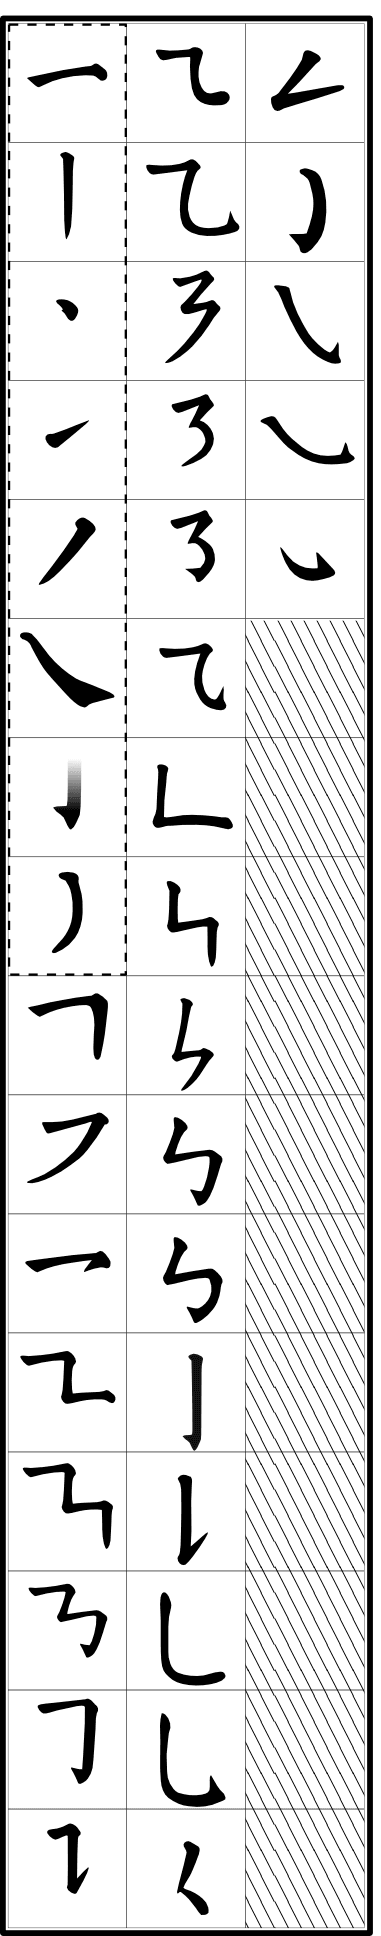 Strokes used in Chinese writing. (Public Domain)